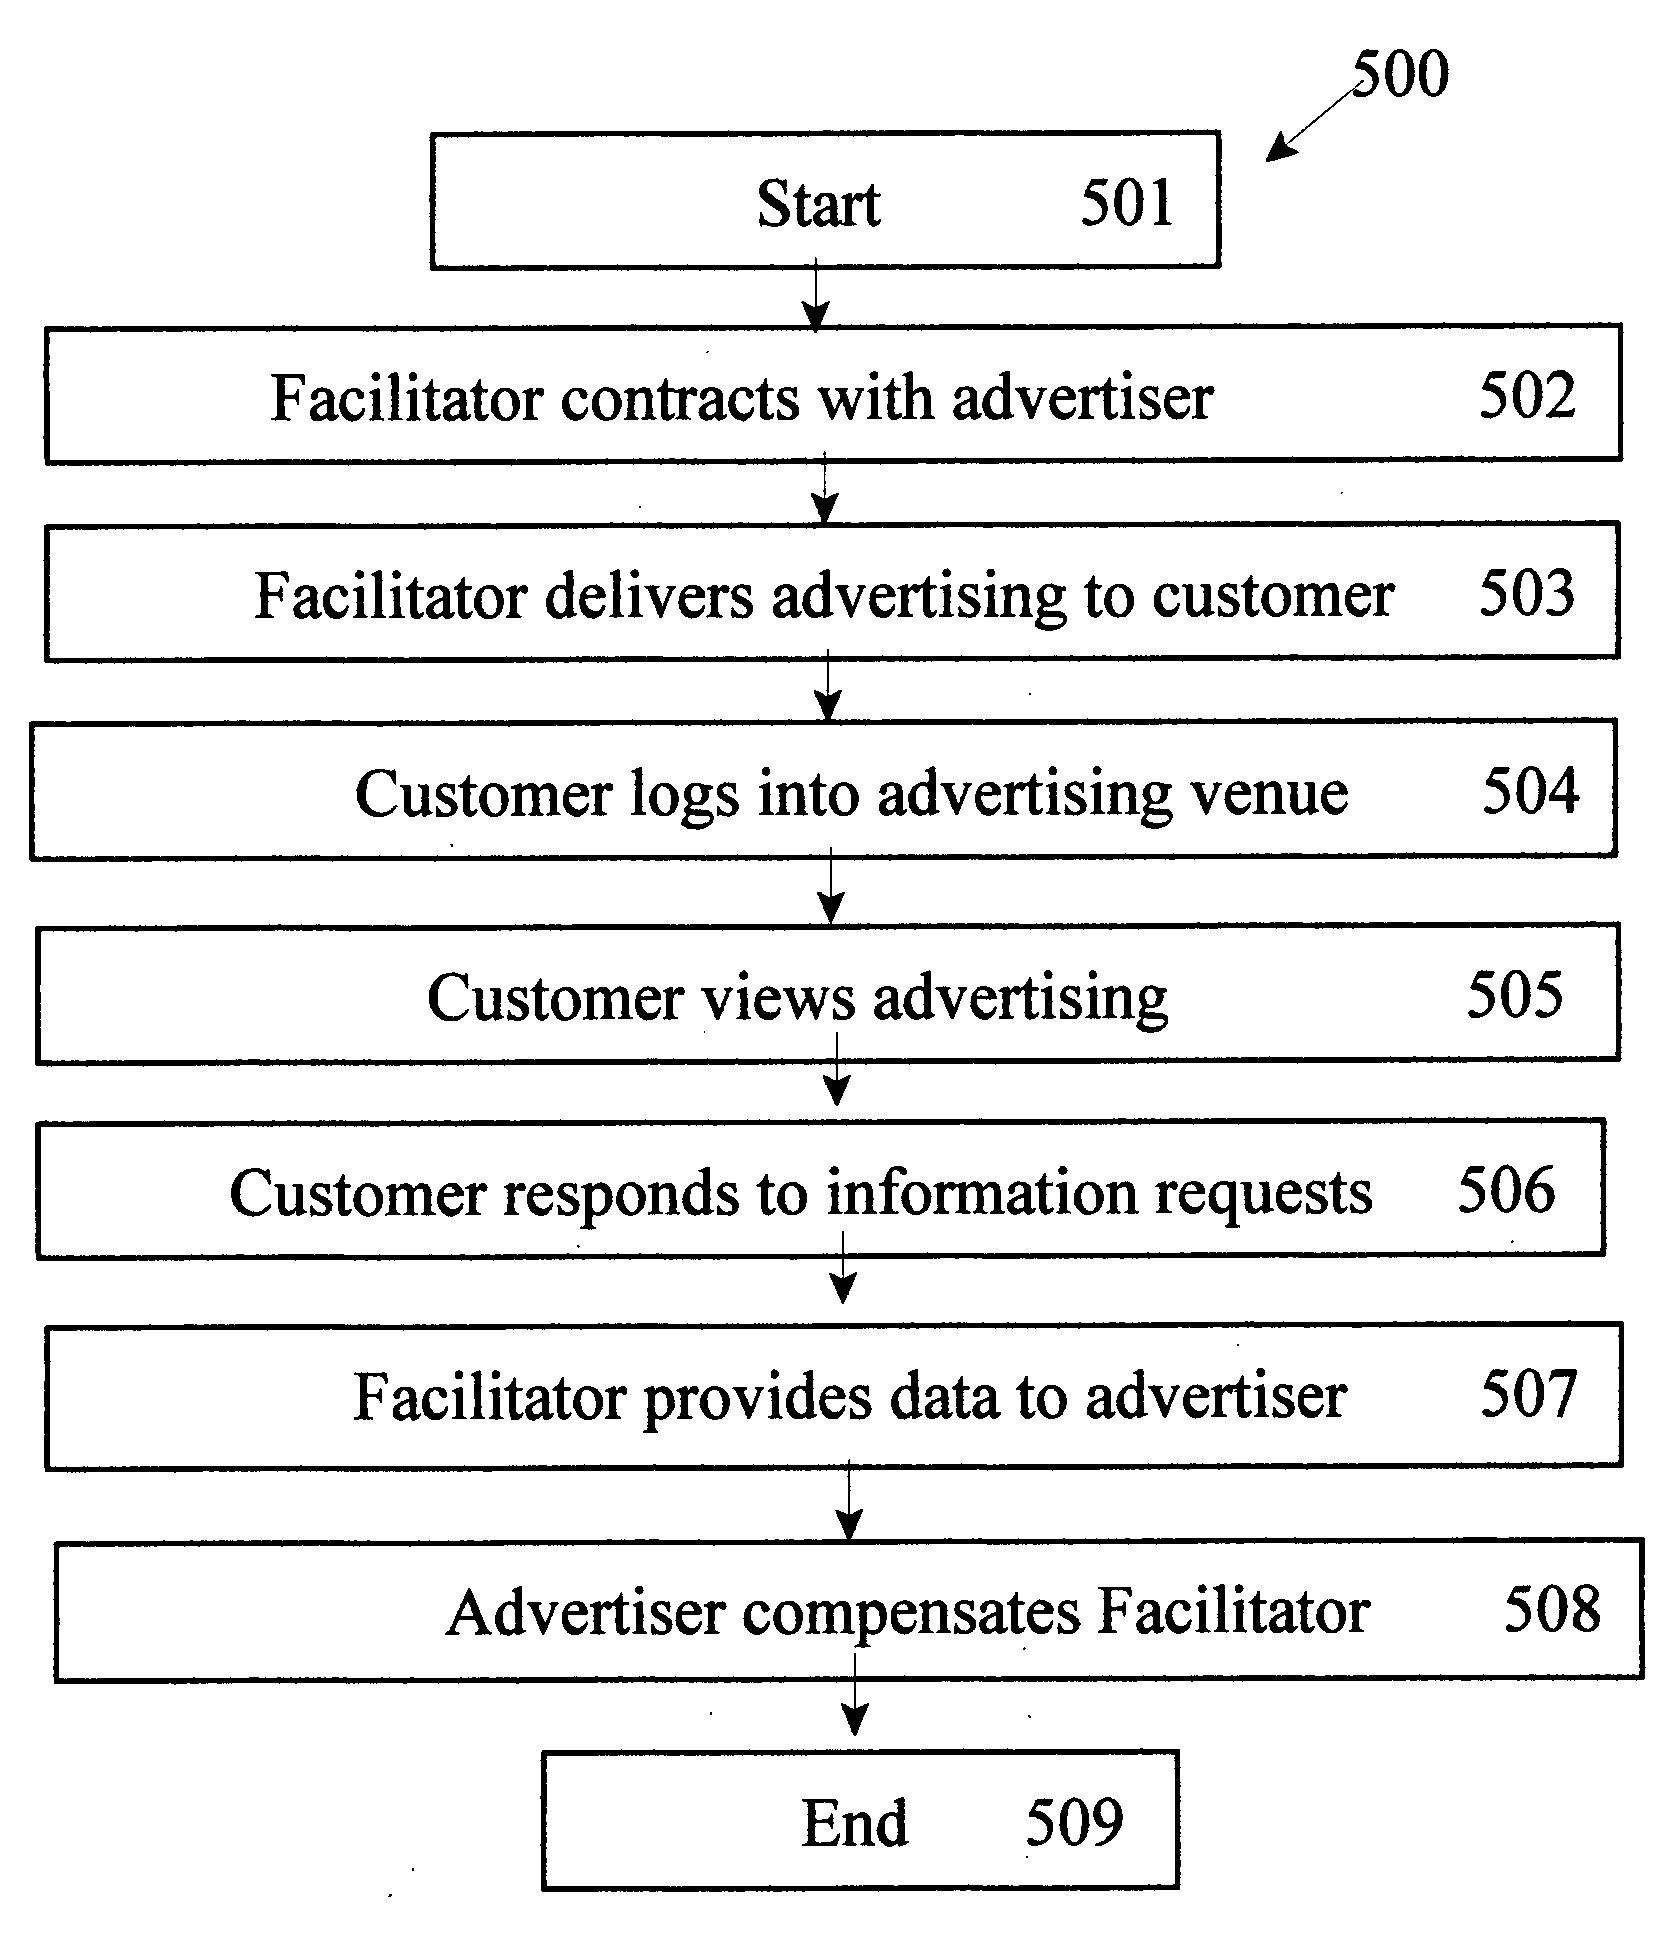 Process for delivering a menu of media and computer options potentially at no cost to consumers in exchange for viewing interactive advertisements